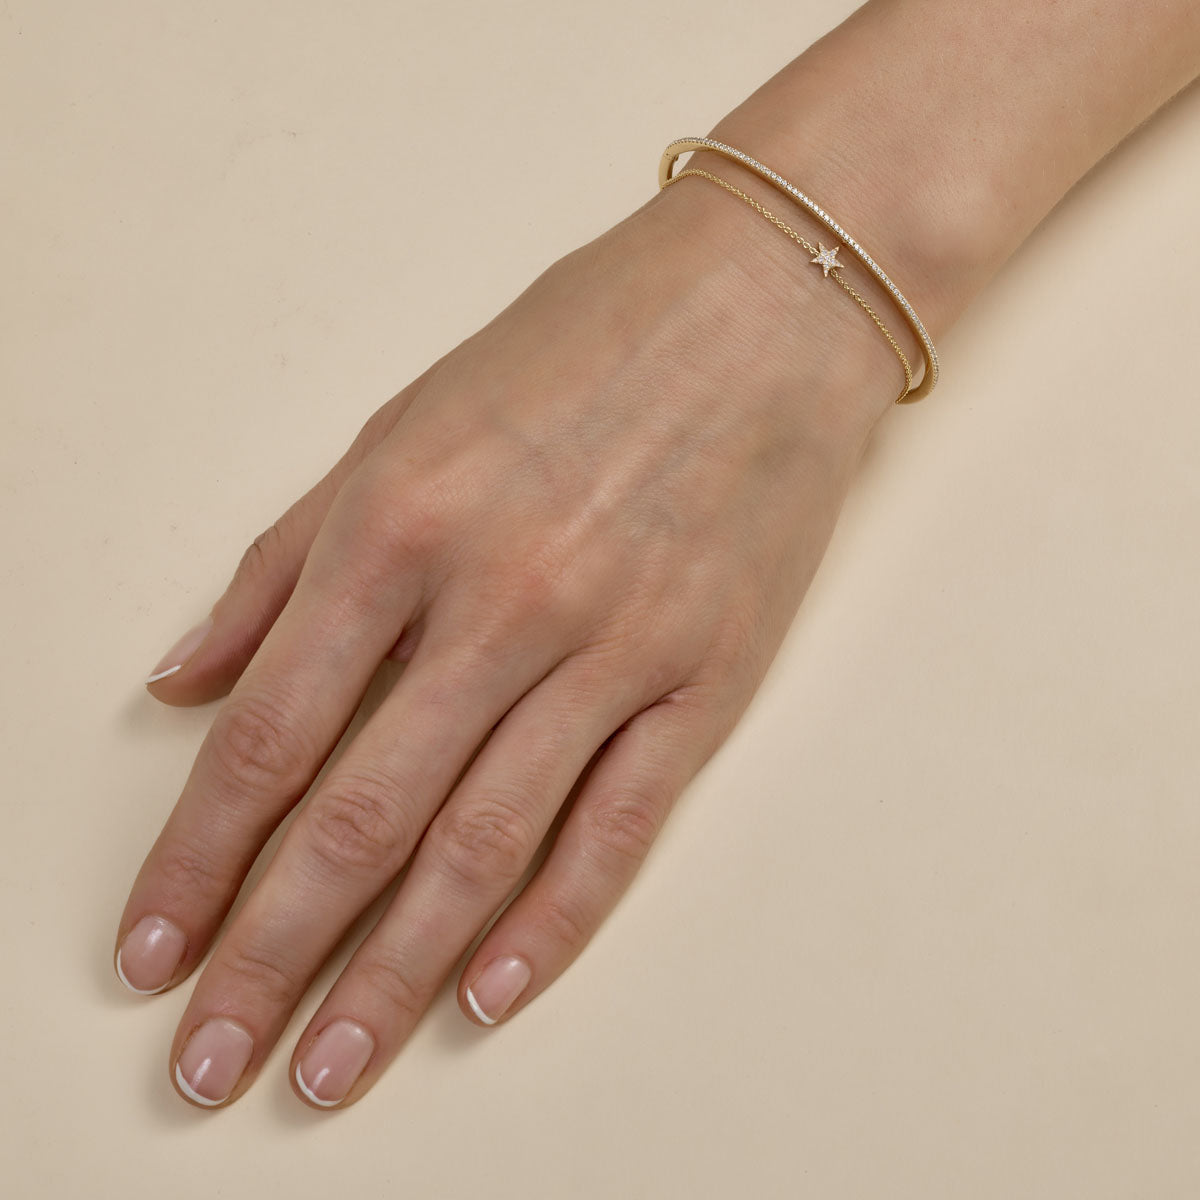 multiple gold bracelets stacked on womans hand